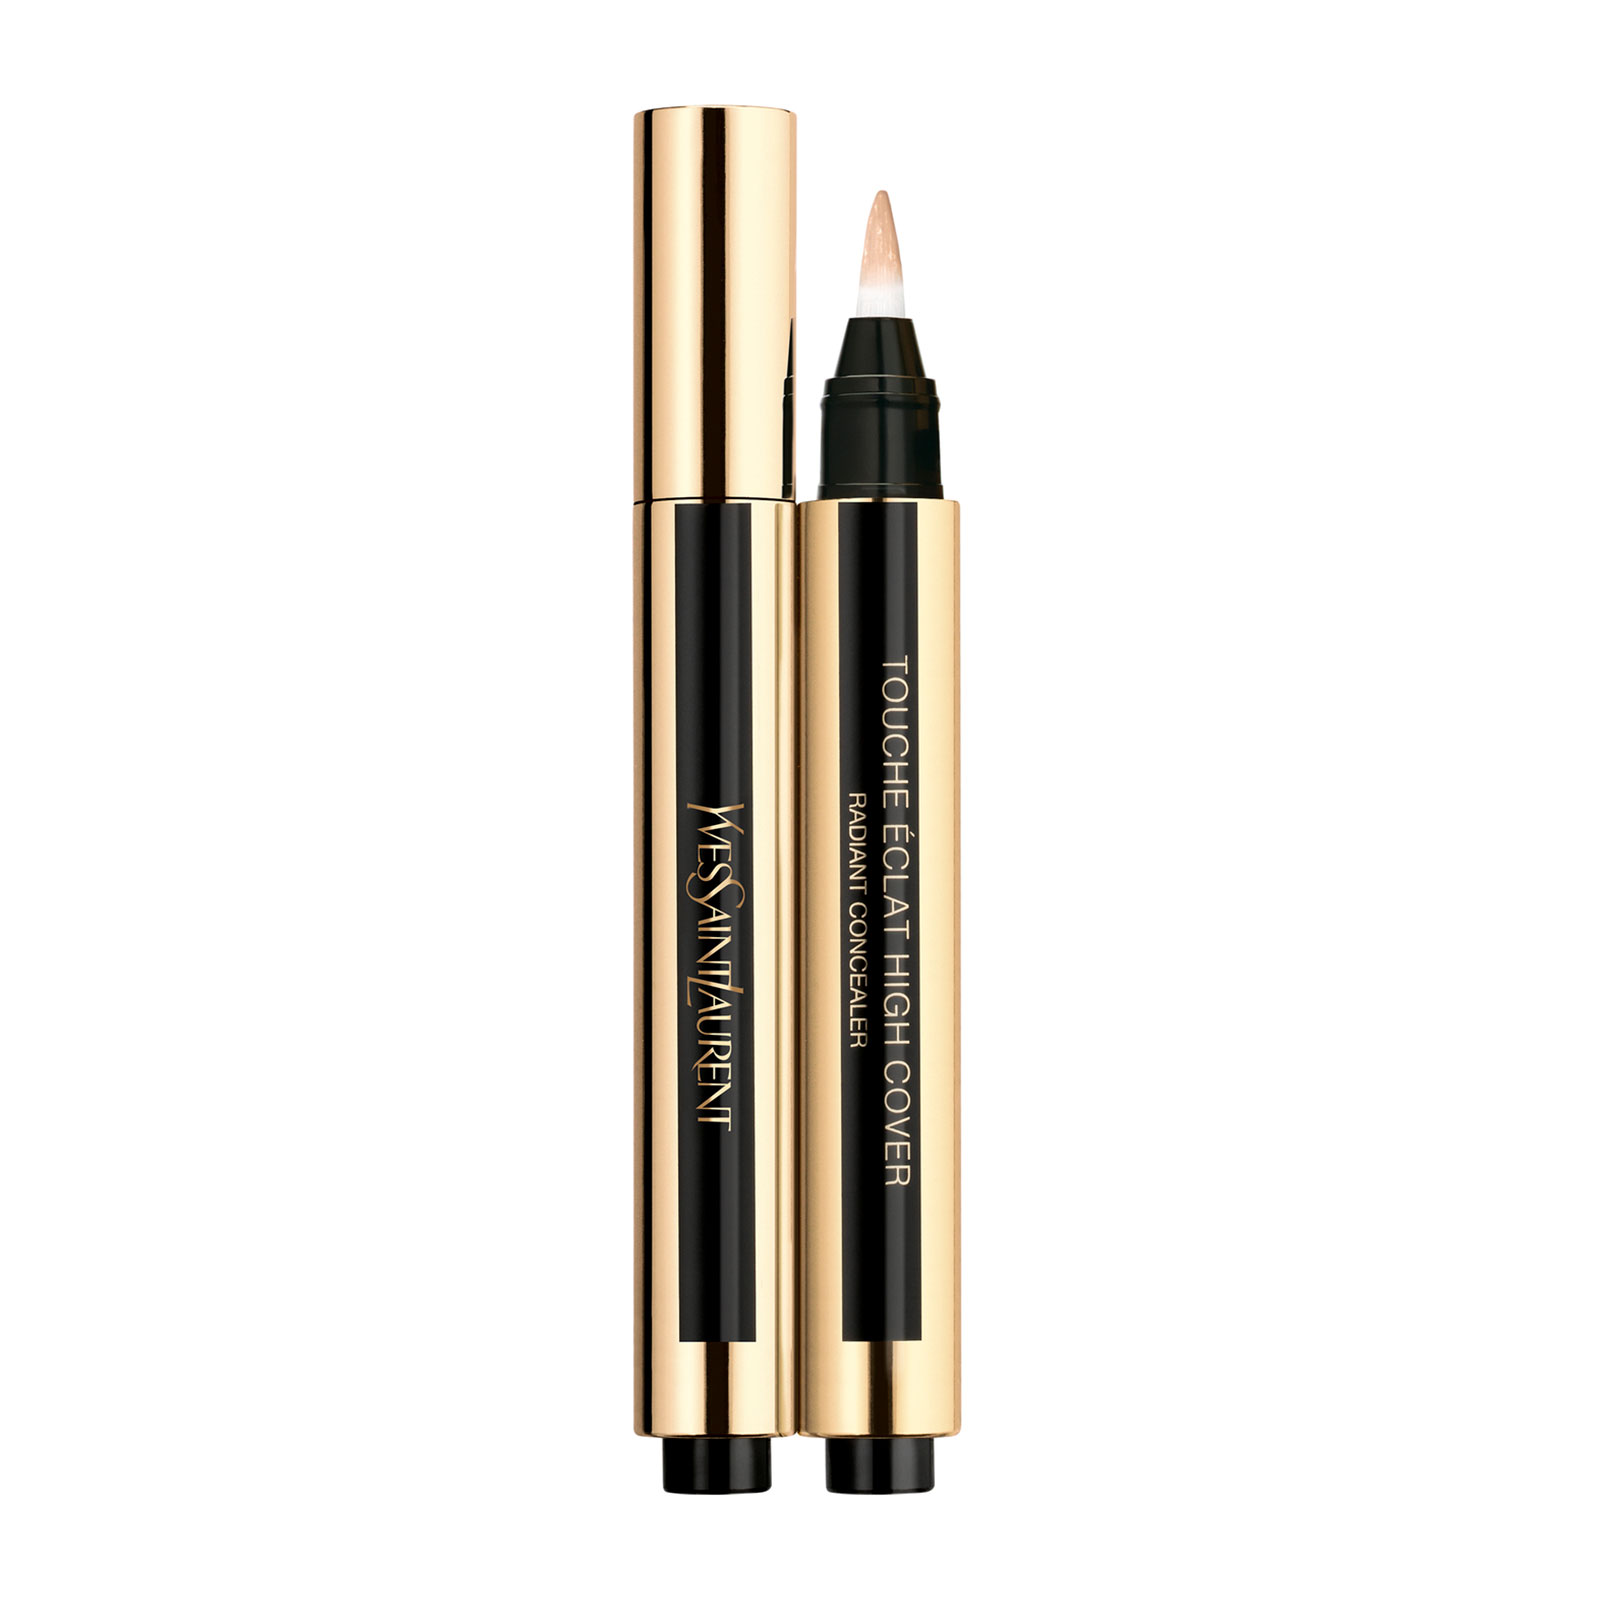 Ysl Beauty Touche Eclat High Cover Concealer 2.5Ml 2 Ivory